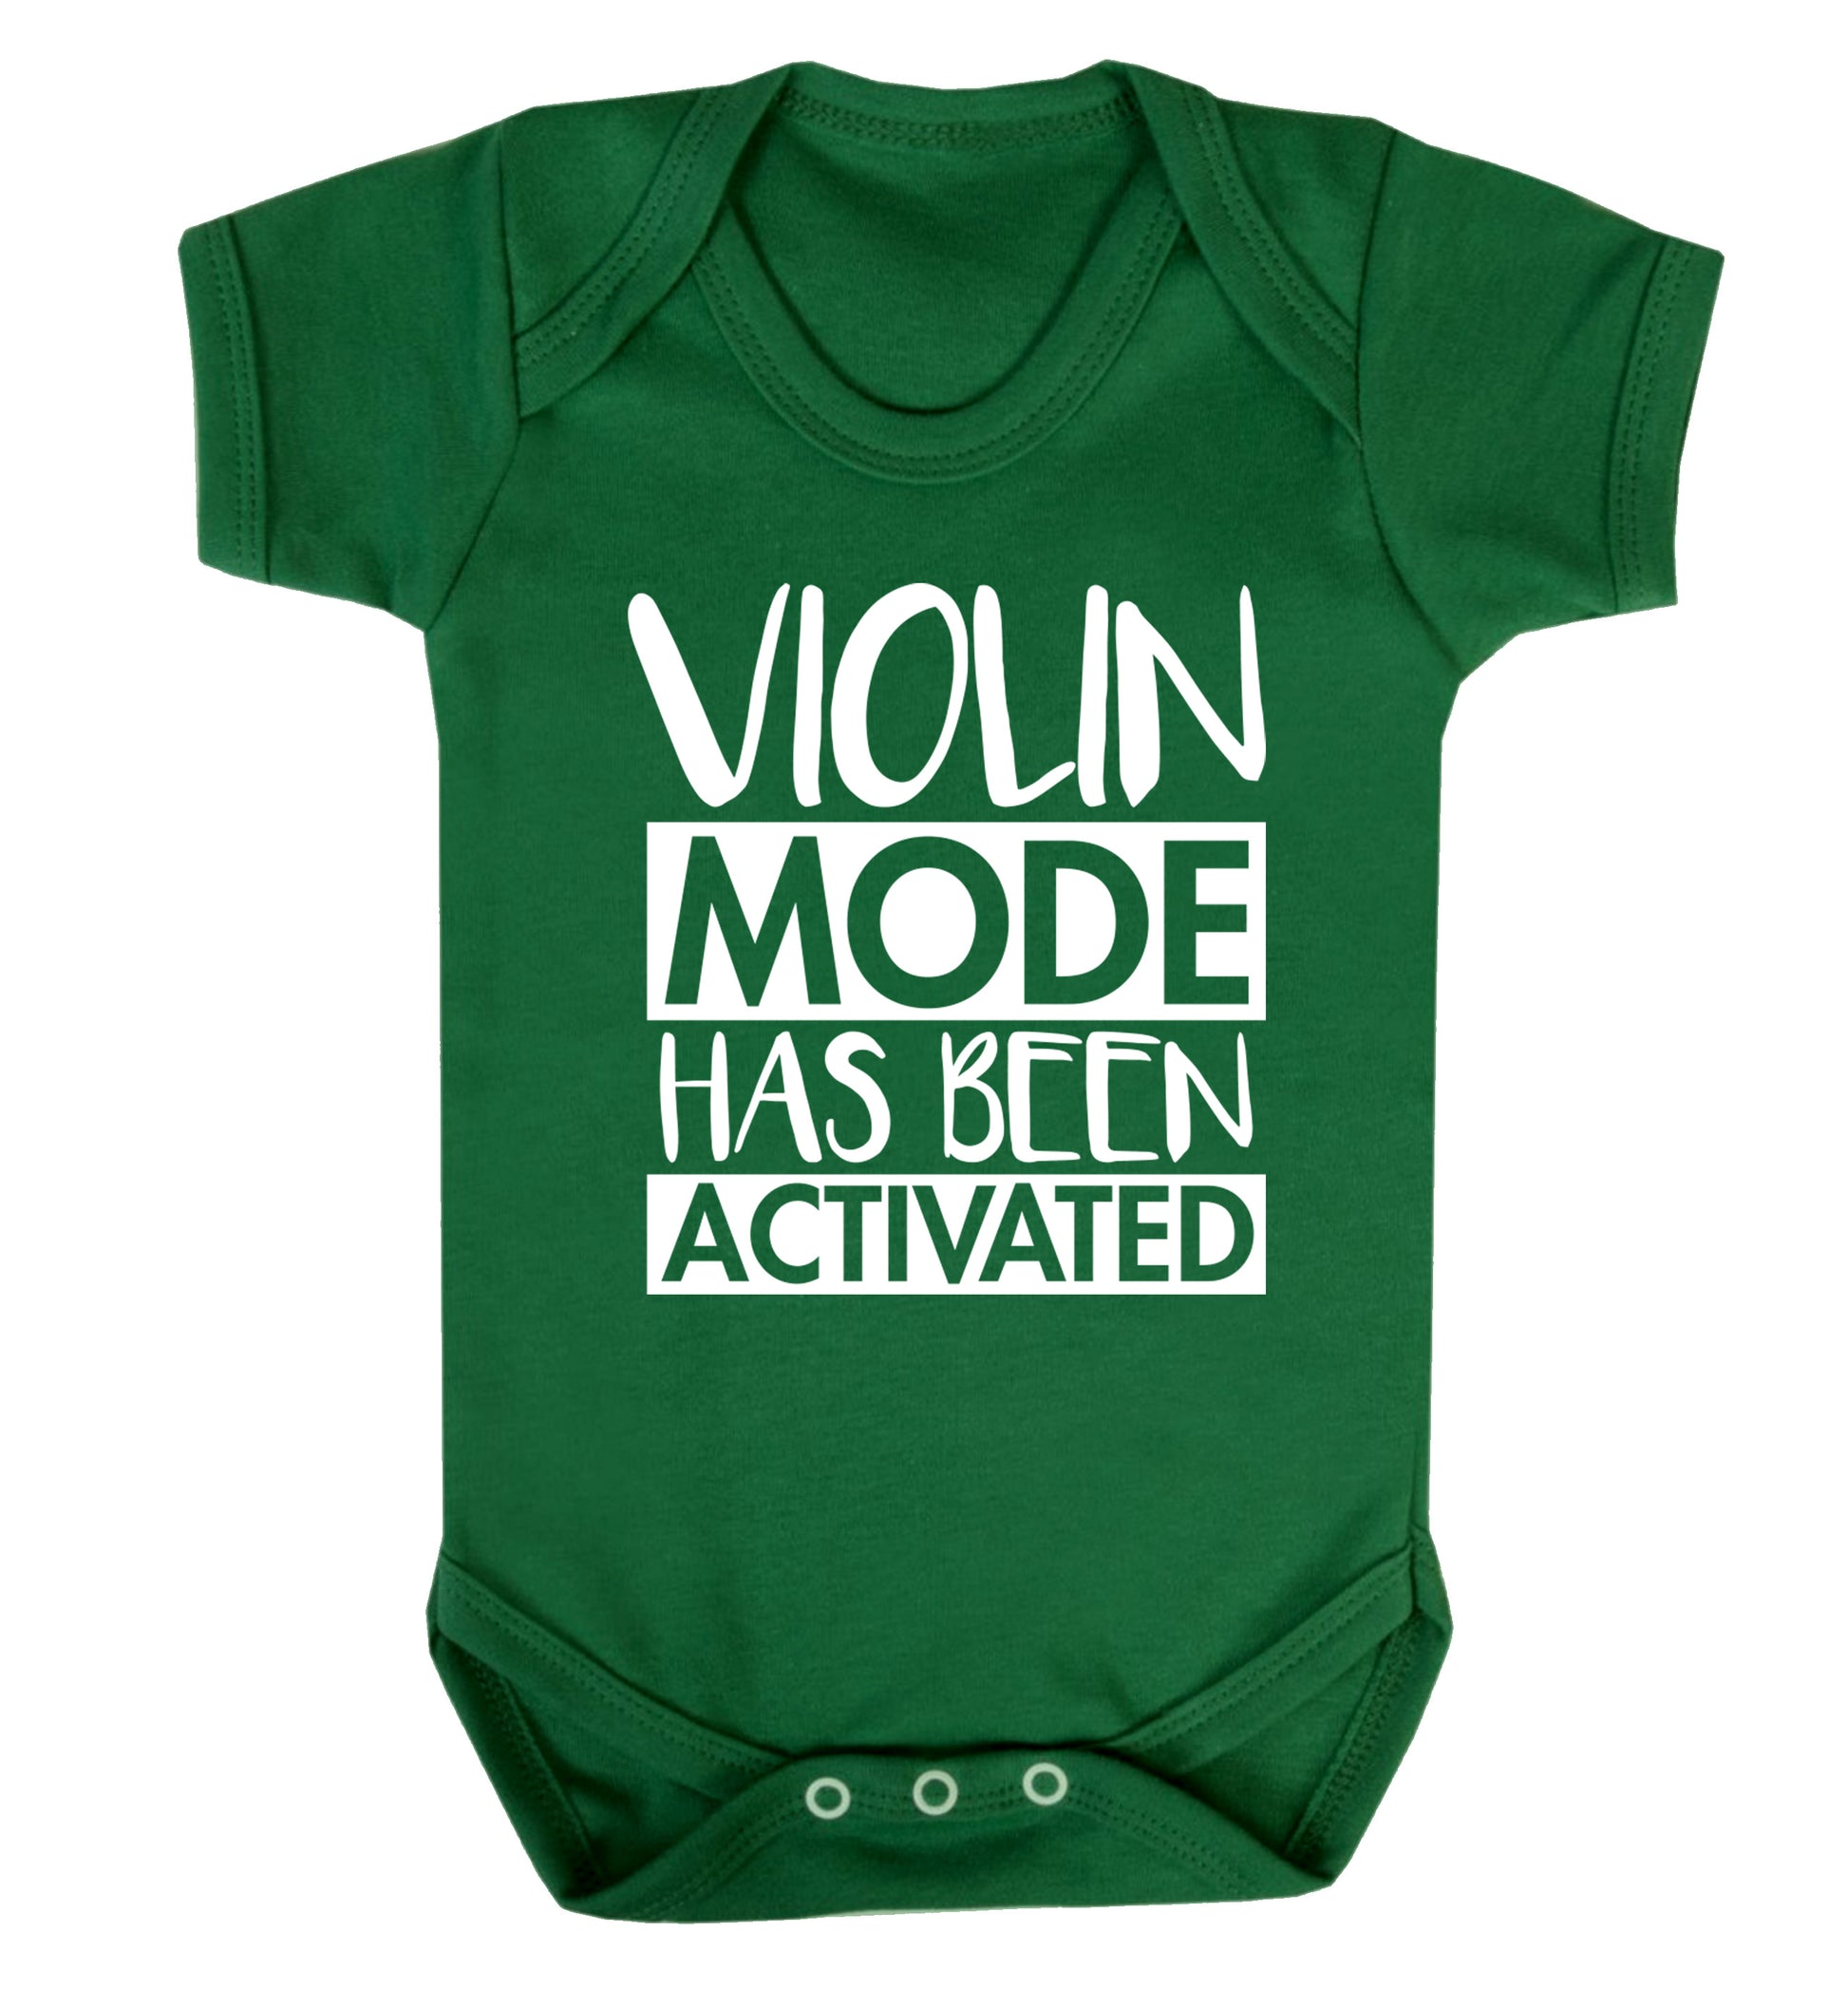 Violin Mode Activated Baby Vest green 18-24 months